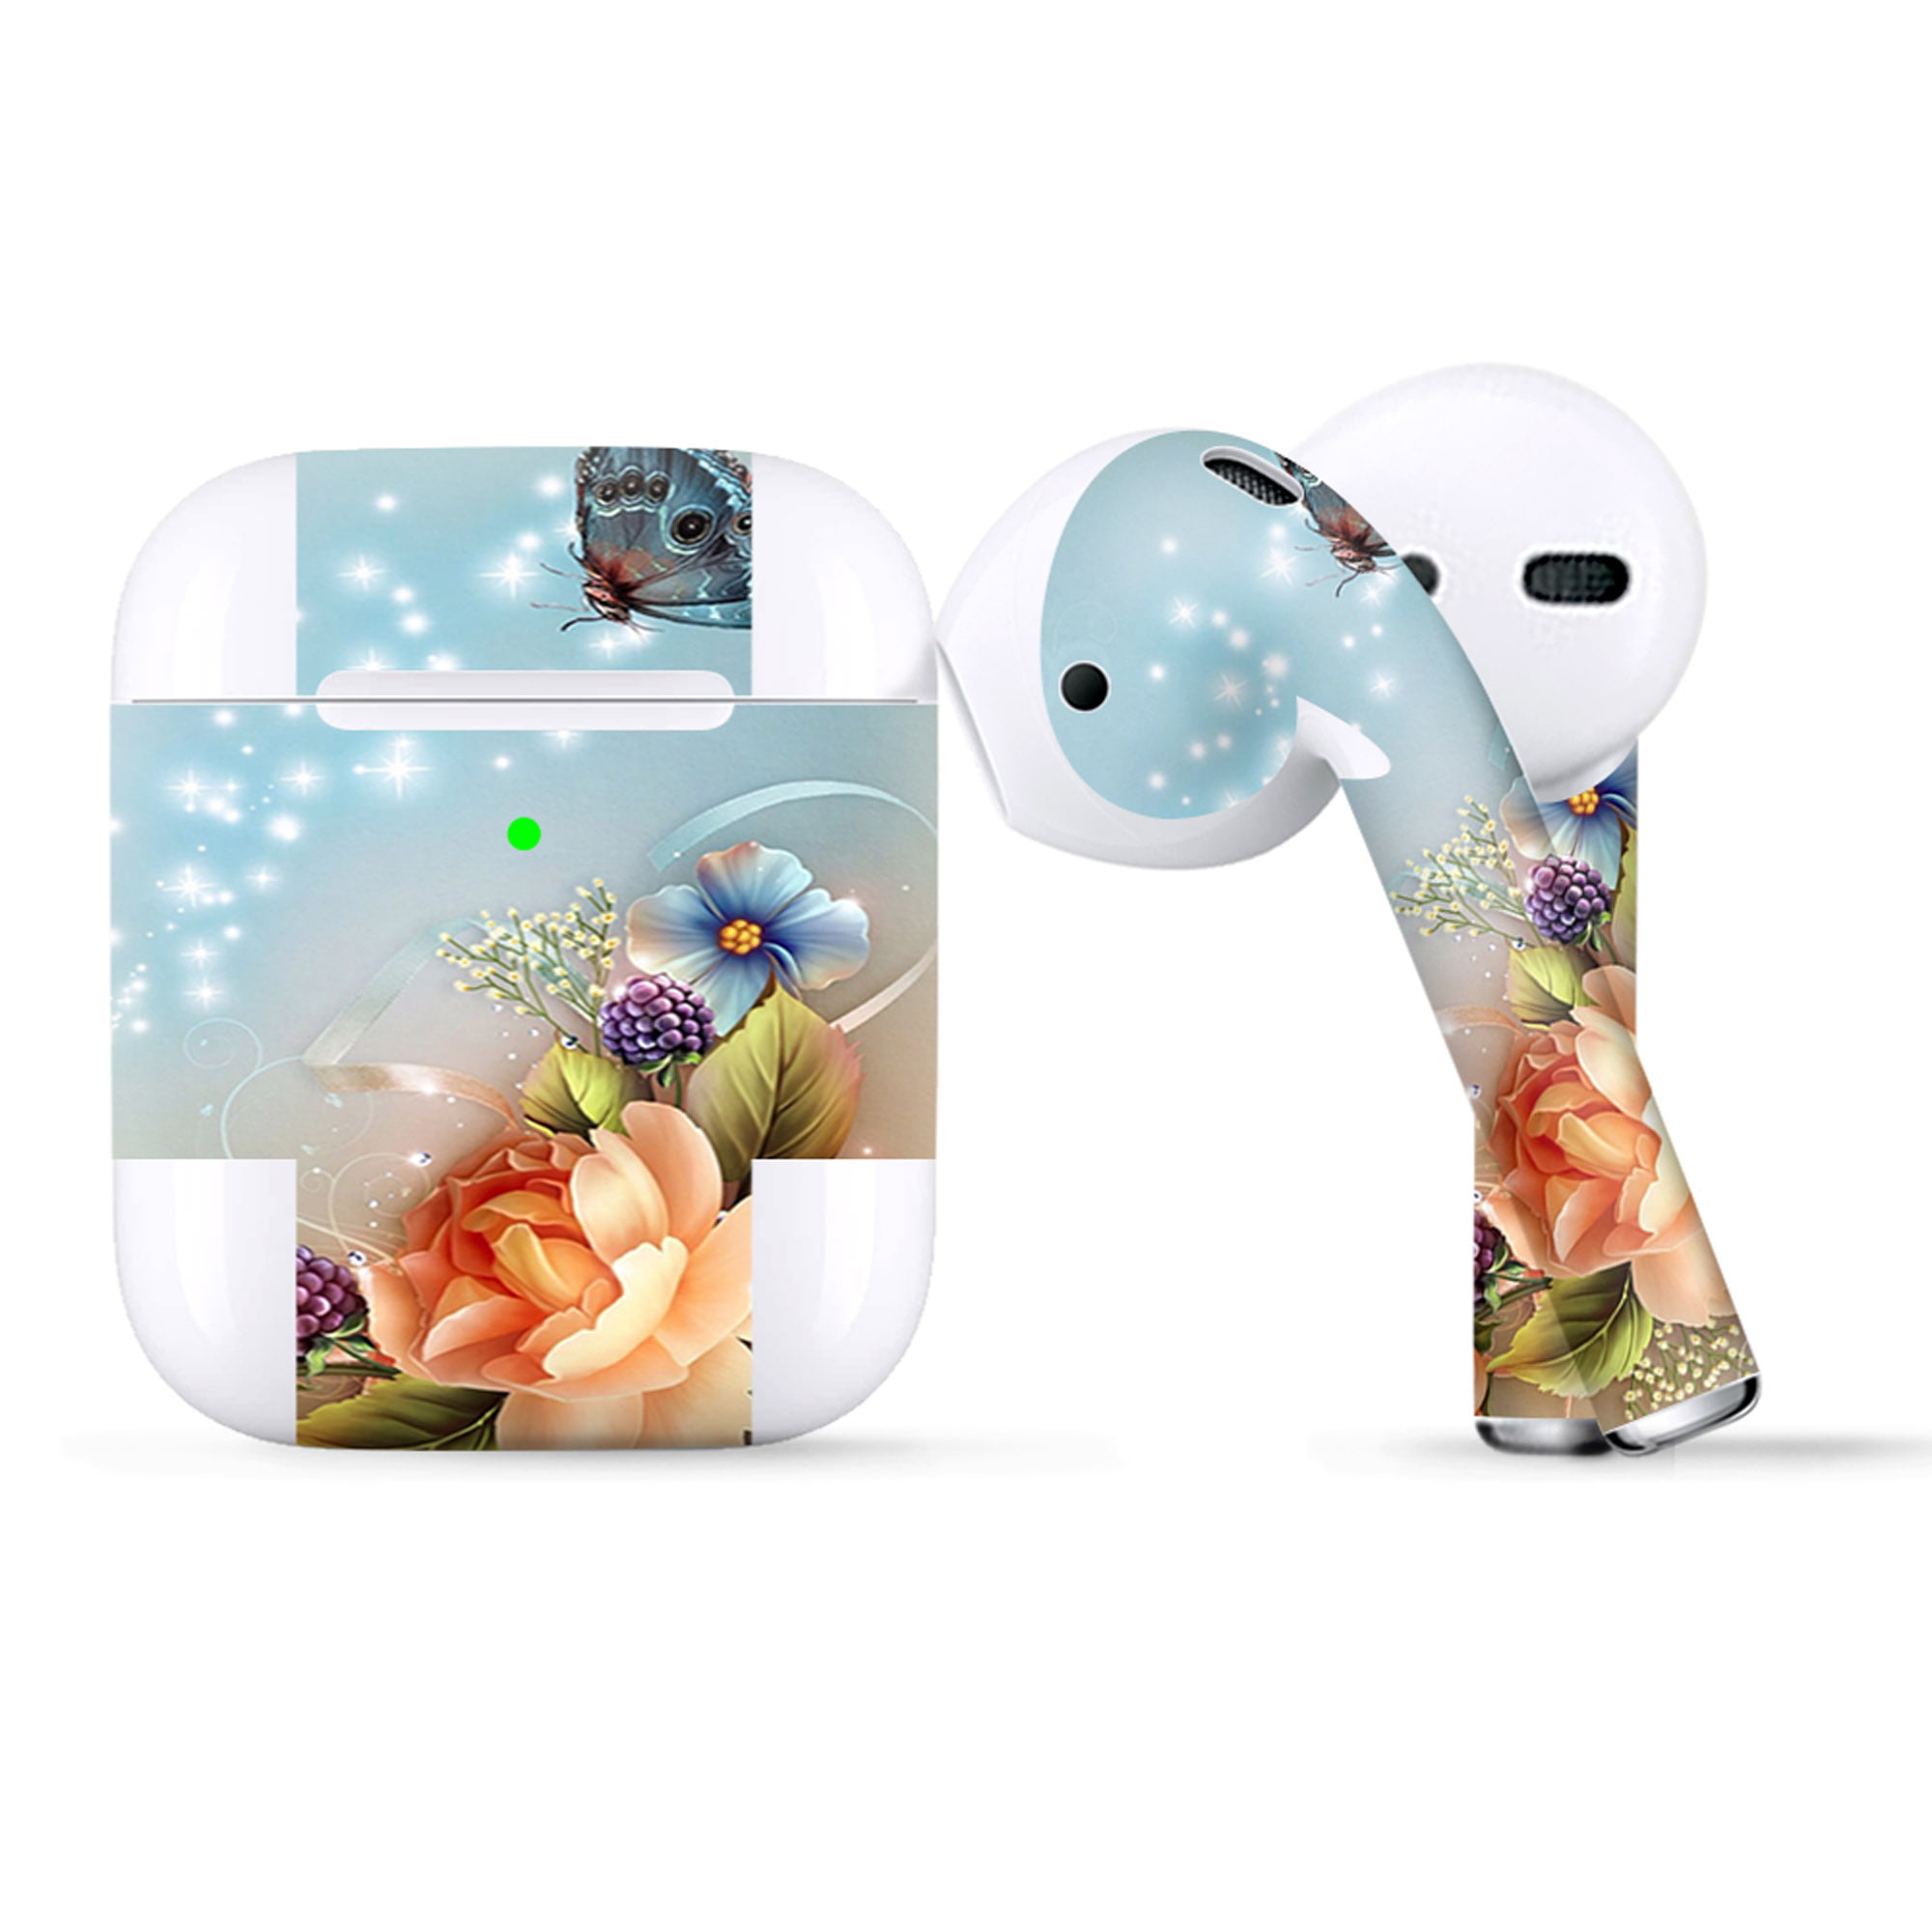 Download Butterfly Decal Airpod Skin Airpod Stickers Apple Decal Airpod Butterfly Case Bright Airpod Skin Butterfly Stickers Apple Vynil Skin Black Gadgets Electronics Accessories Tripod Ee